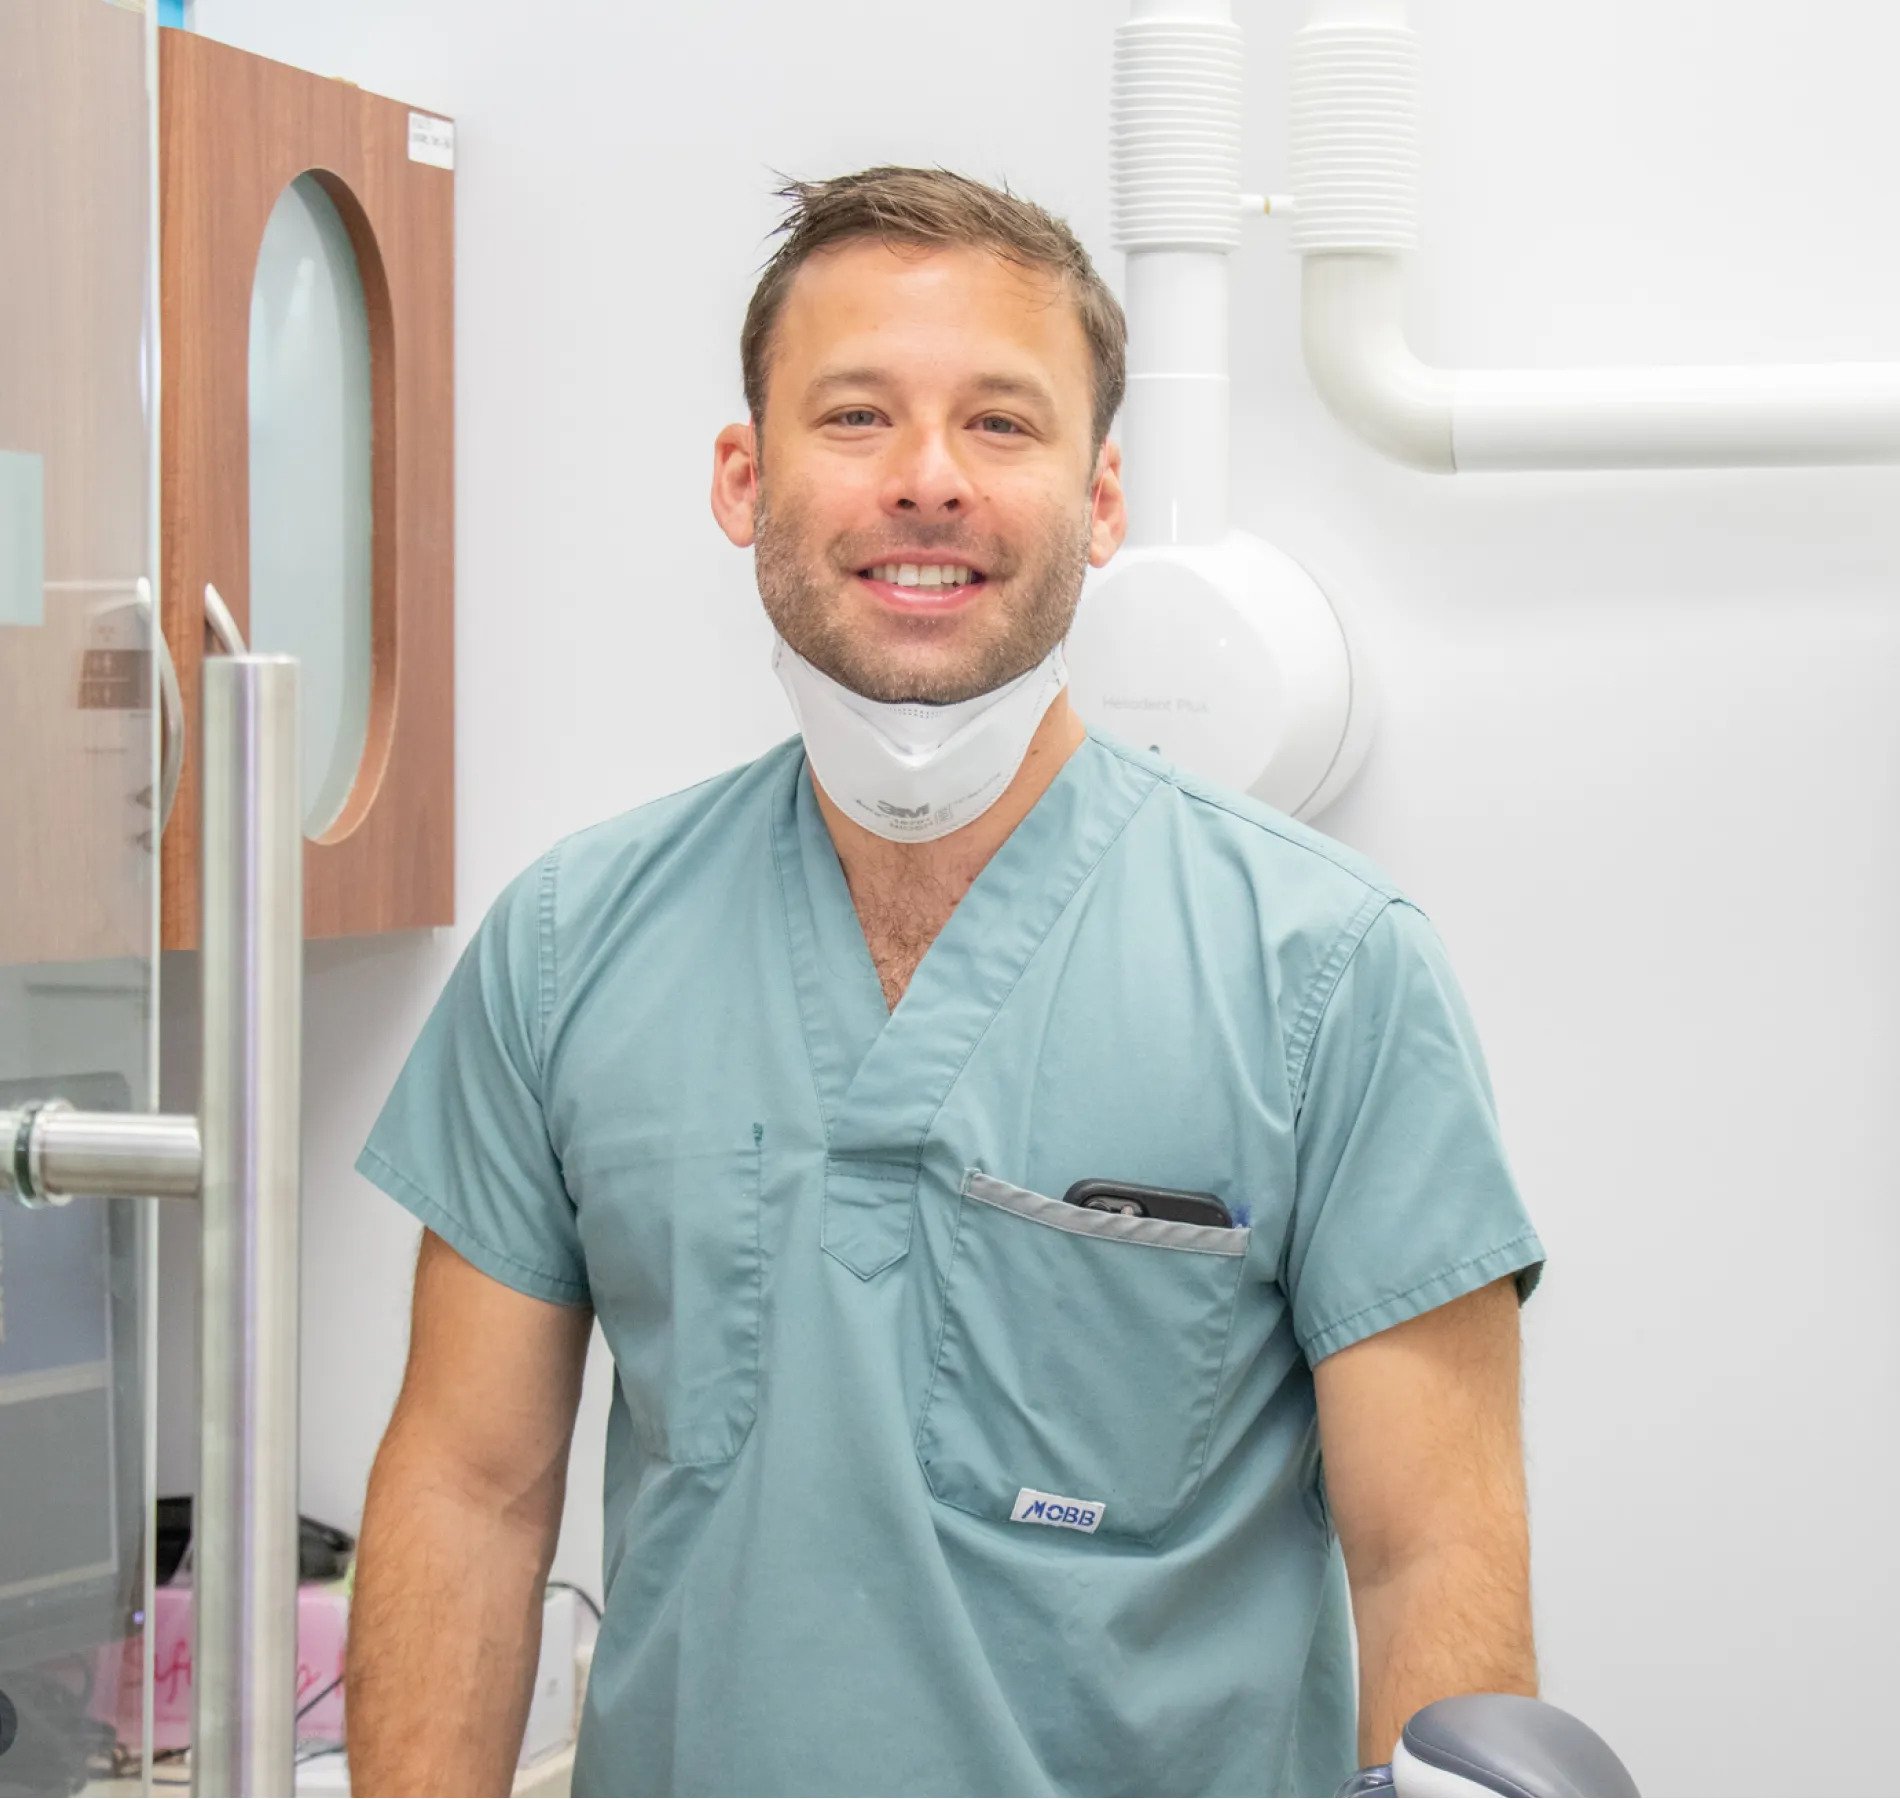 Get to know the team at our Midtown Toronto dentist office